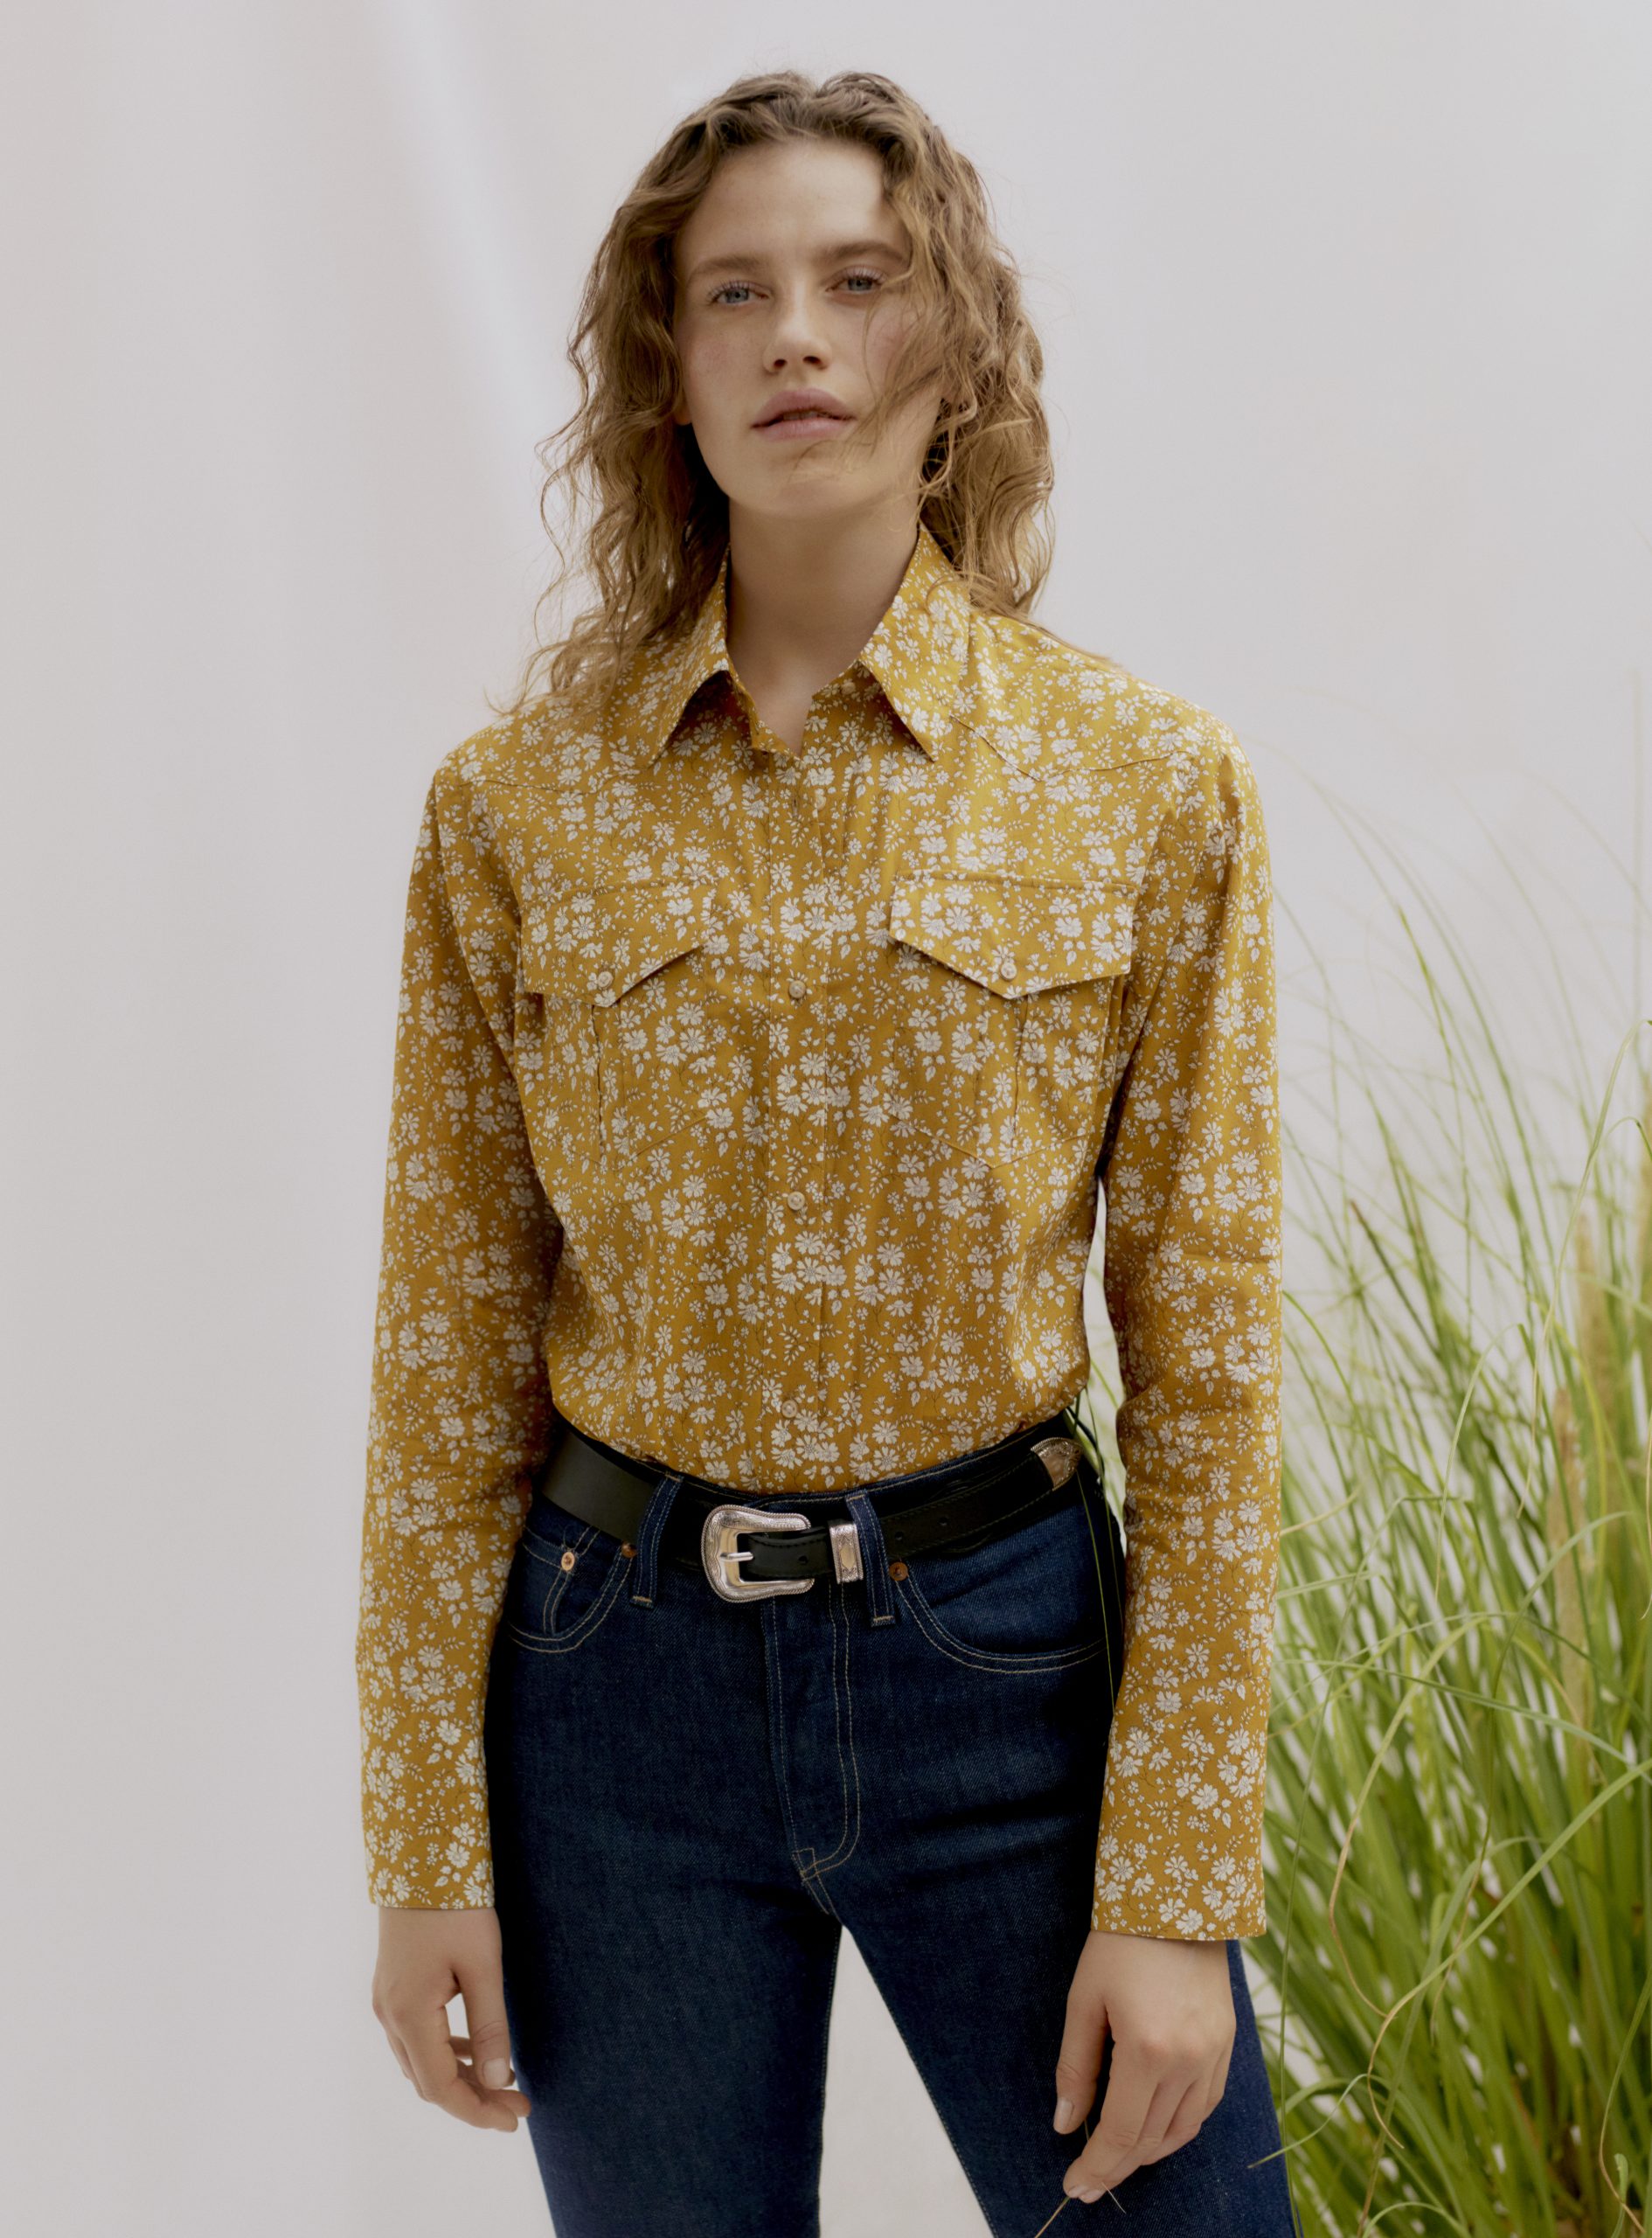 Woman wearing the Unisex Camargue Cowboy Shirt sewing pattern by Liberty Sewing Patterns. A shirt pattern made in cotton, or chambray fabrics, featuring a classic shirt collar, long sleeves with button cuffs, patch chest pockets and button front closure.